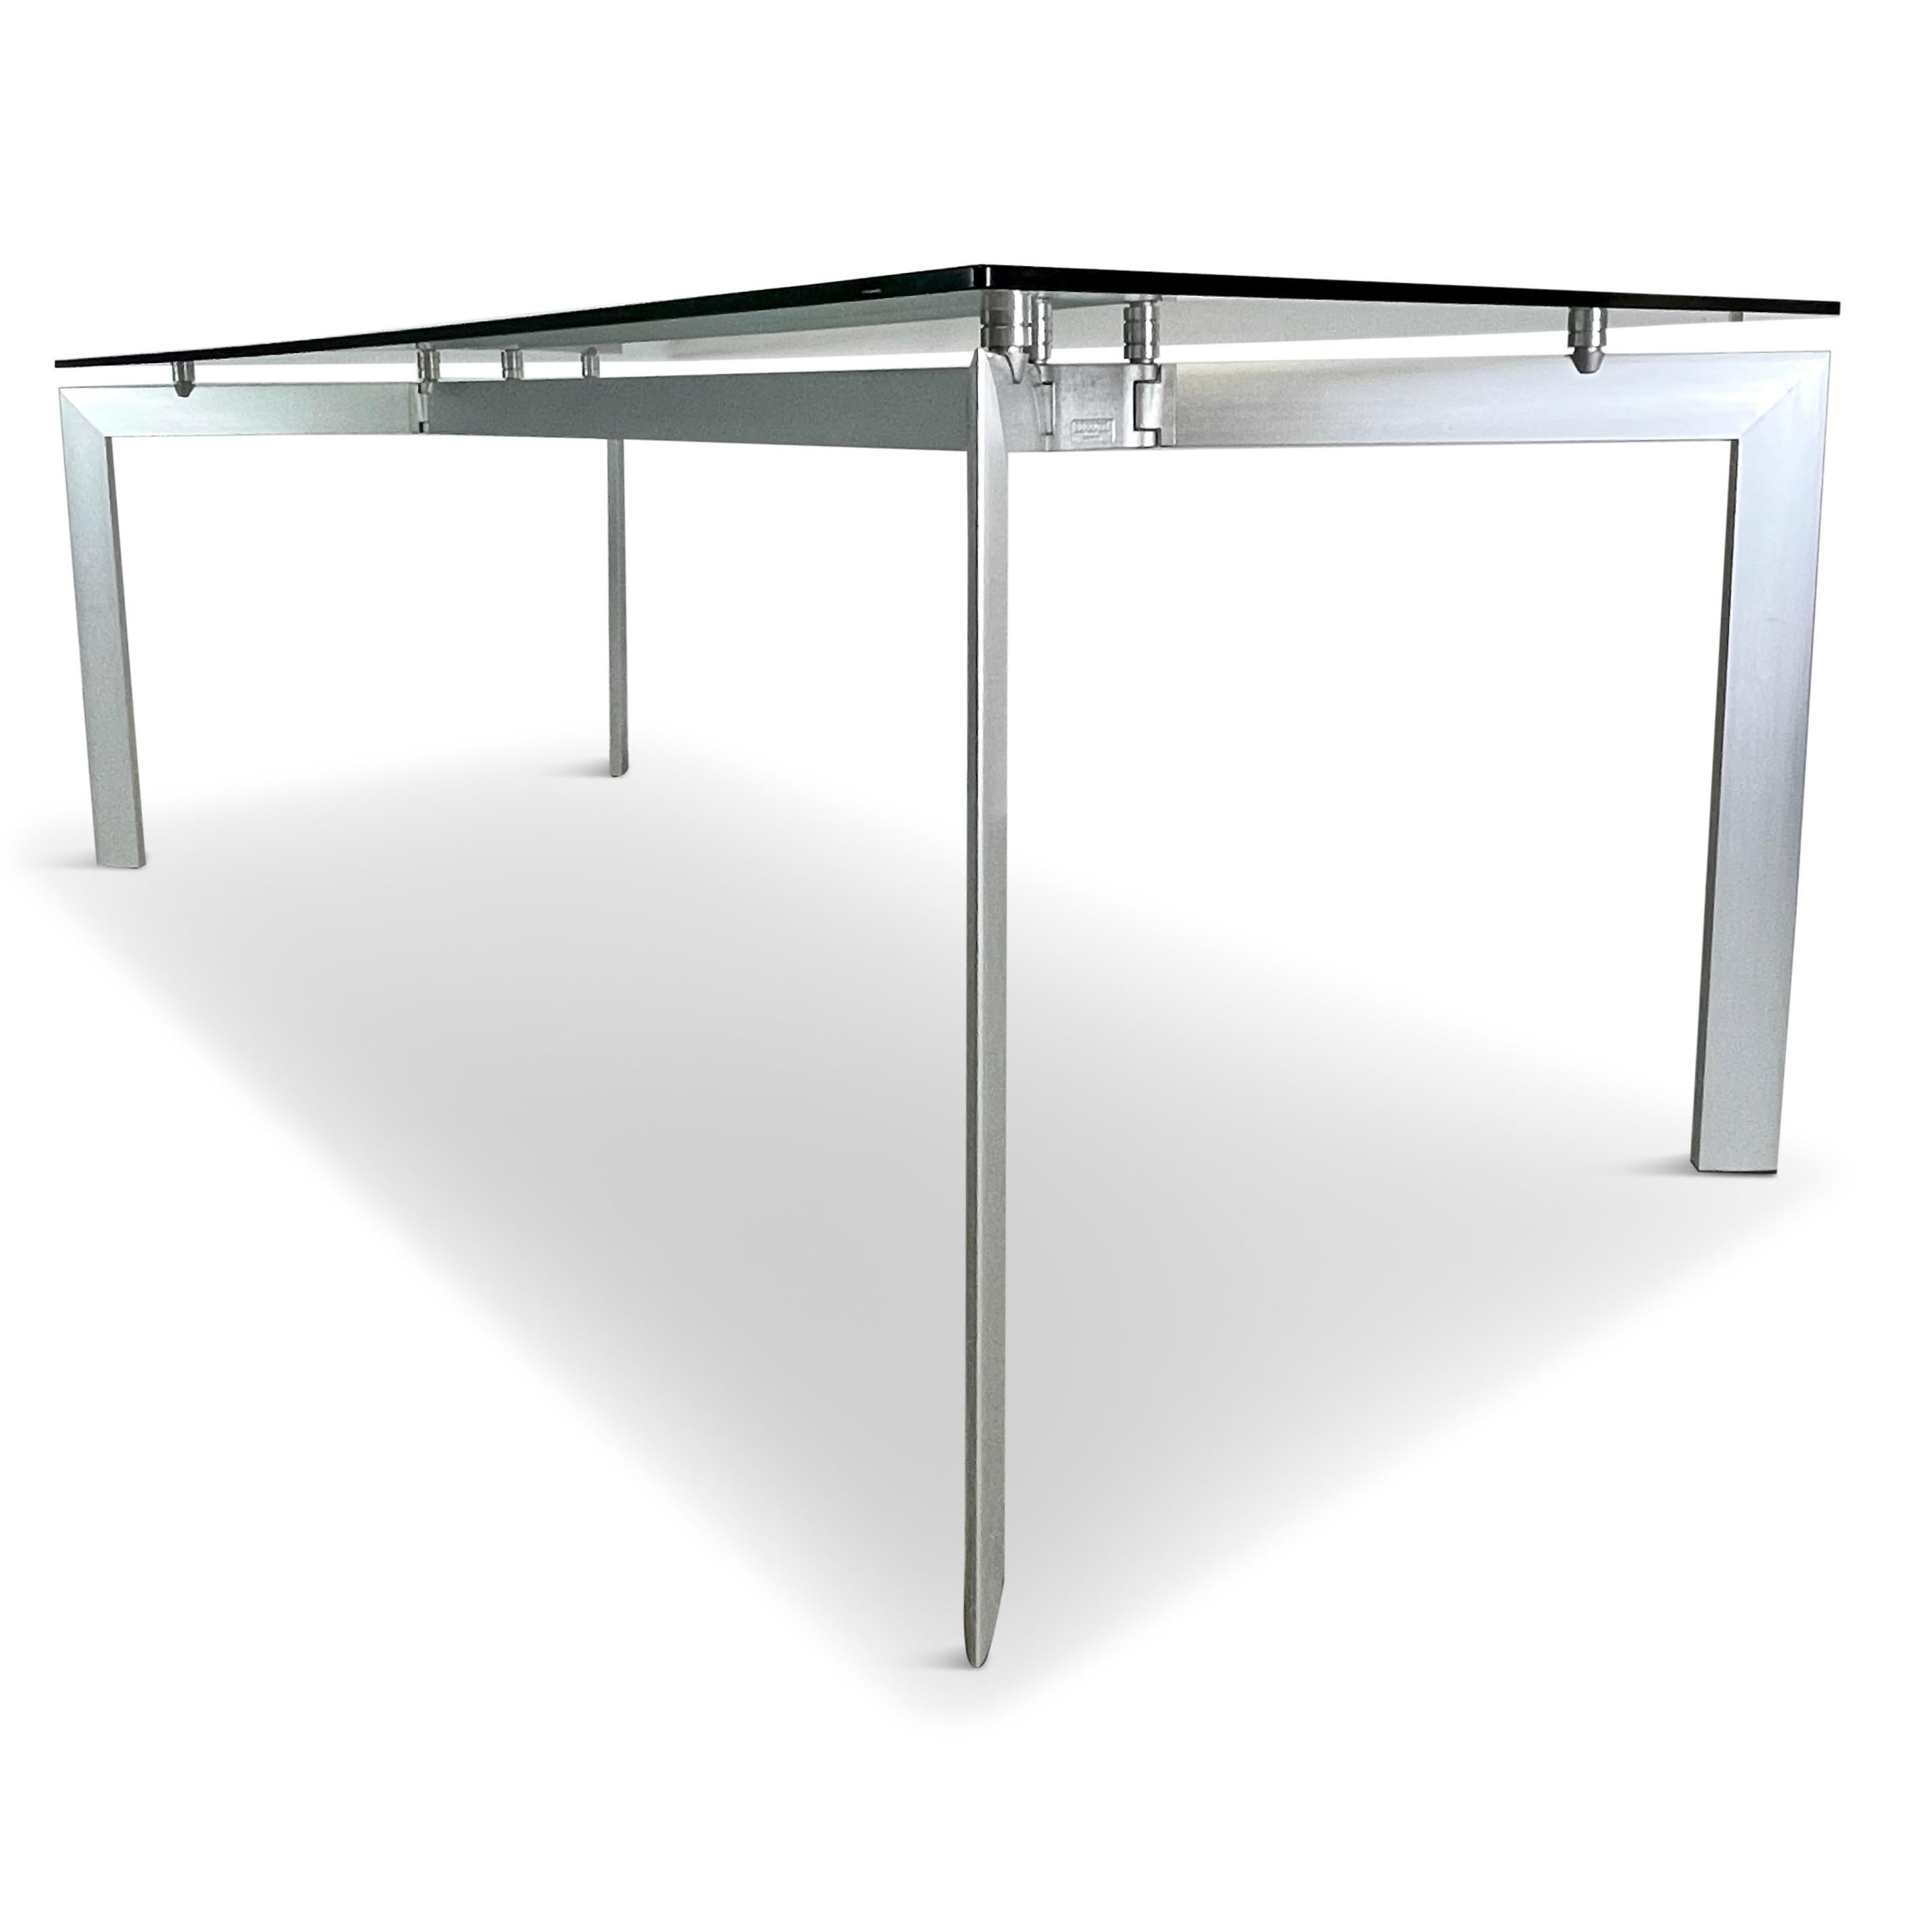 For your consideration a beautiful sculptural dining table designed by Makio Hasuike for Seccose, Italy, circa 1980s. The name is METRA and is built with a super light yet super-strong aluminum frame. Original glass has smart aluminum screw